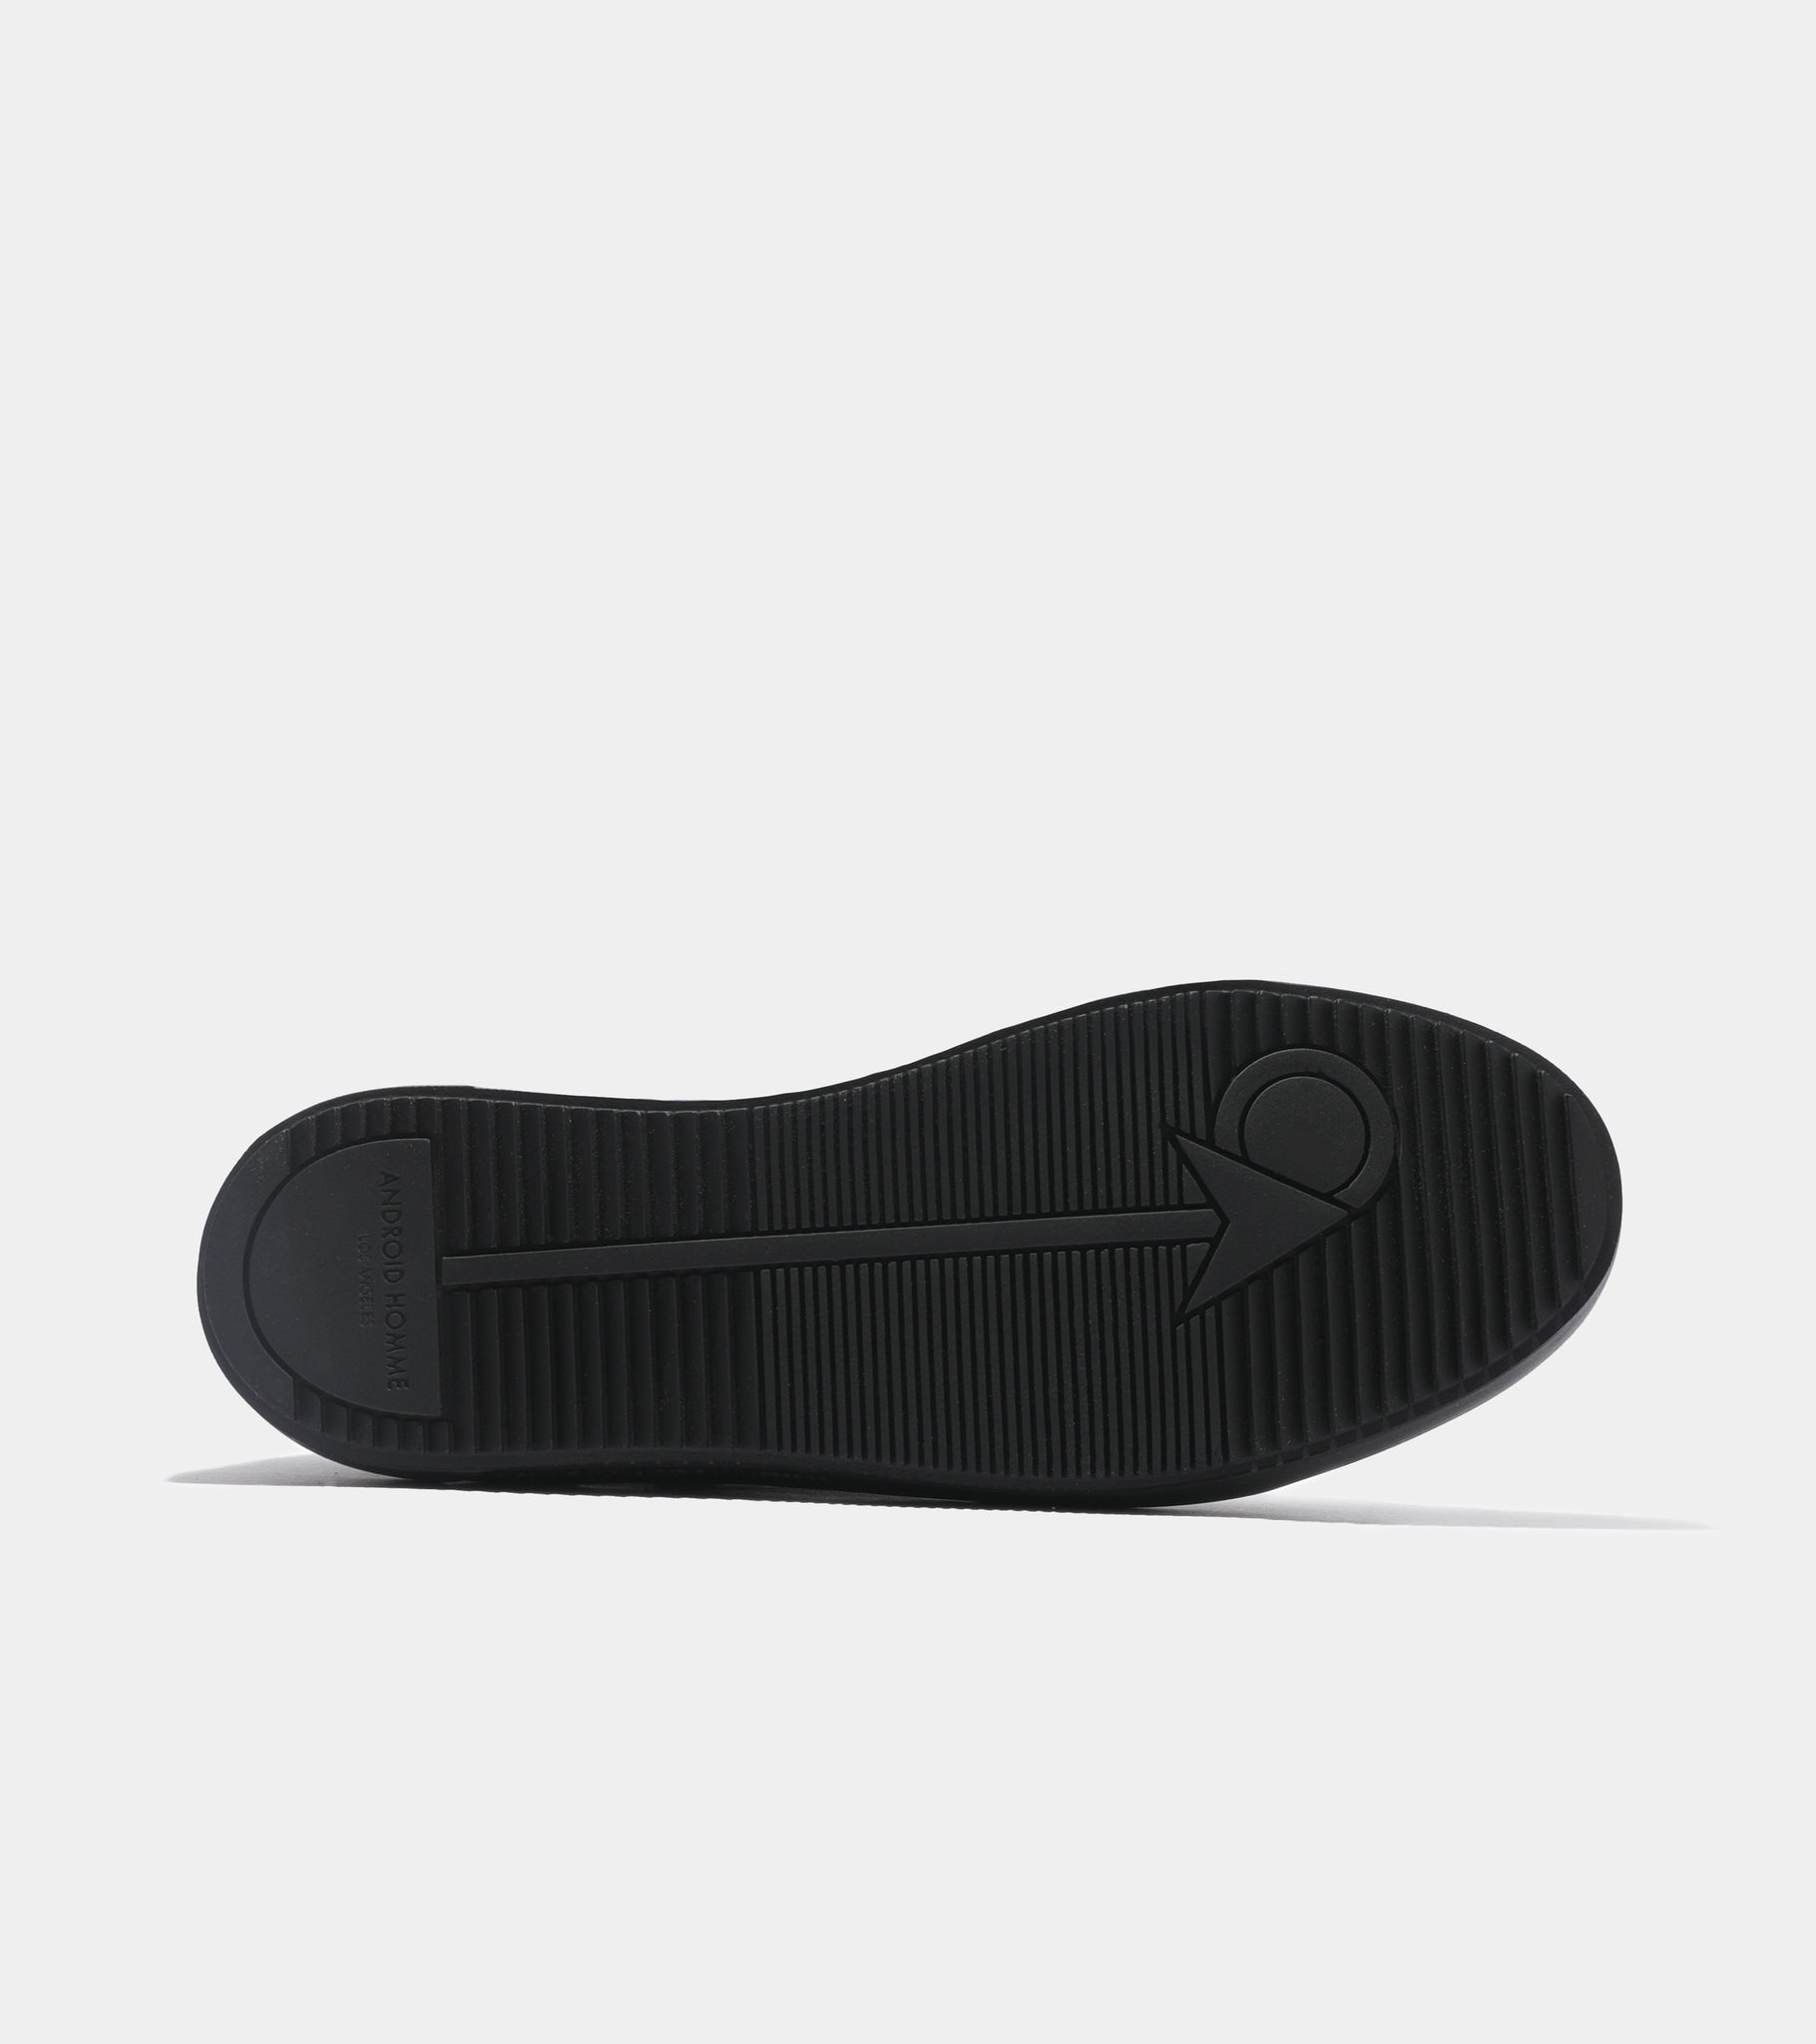 Detailed ecom imagery of the Venice Black Rubber Tipnet Android Homme Trainers sole.